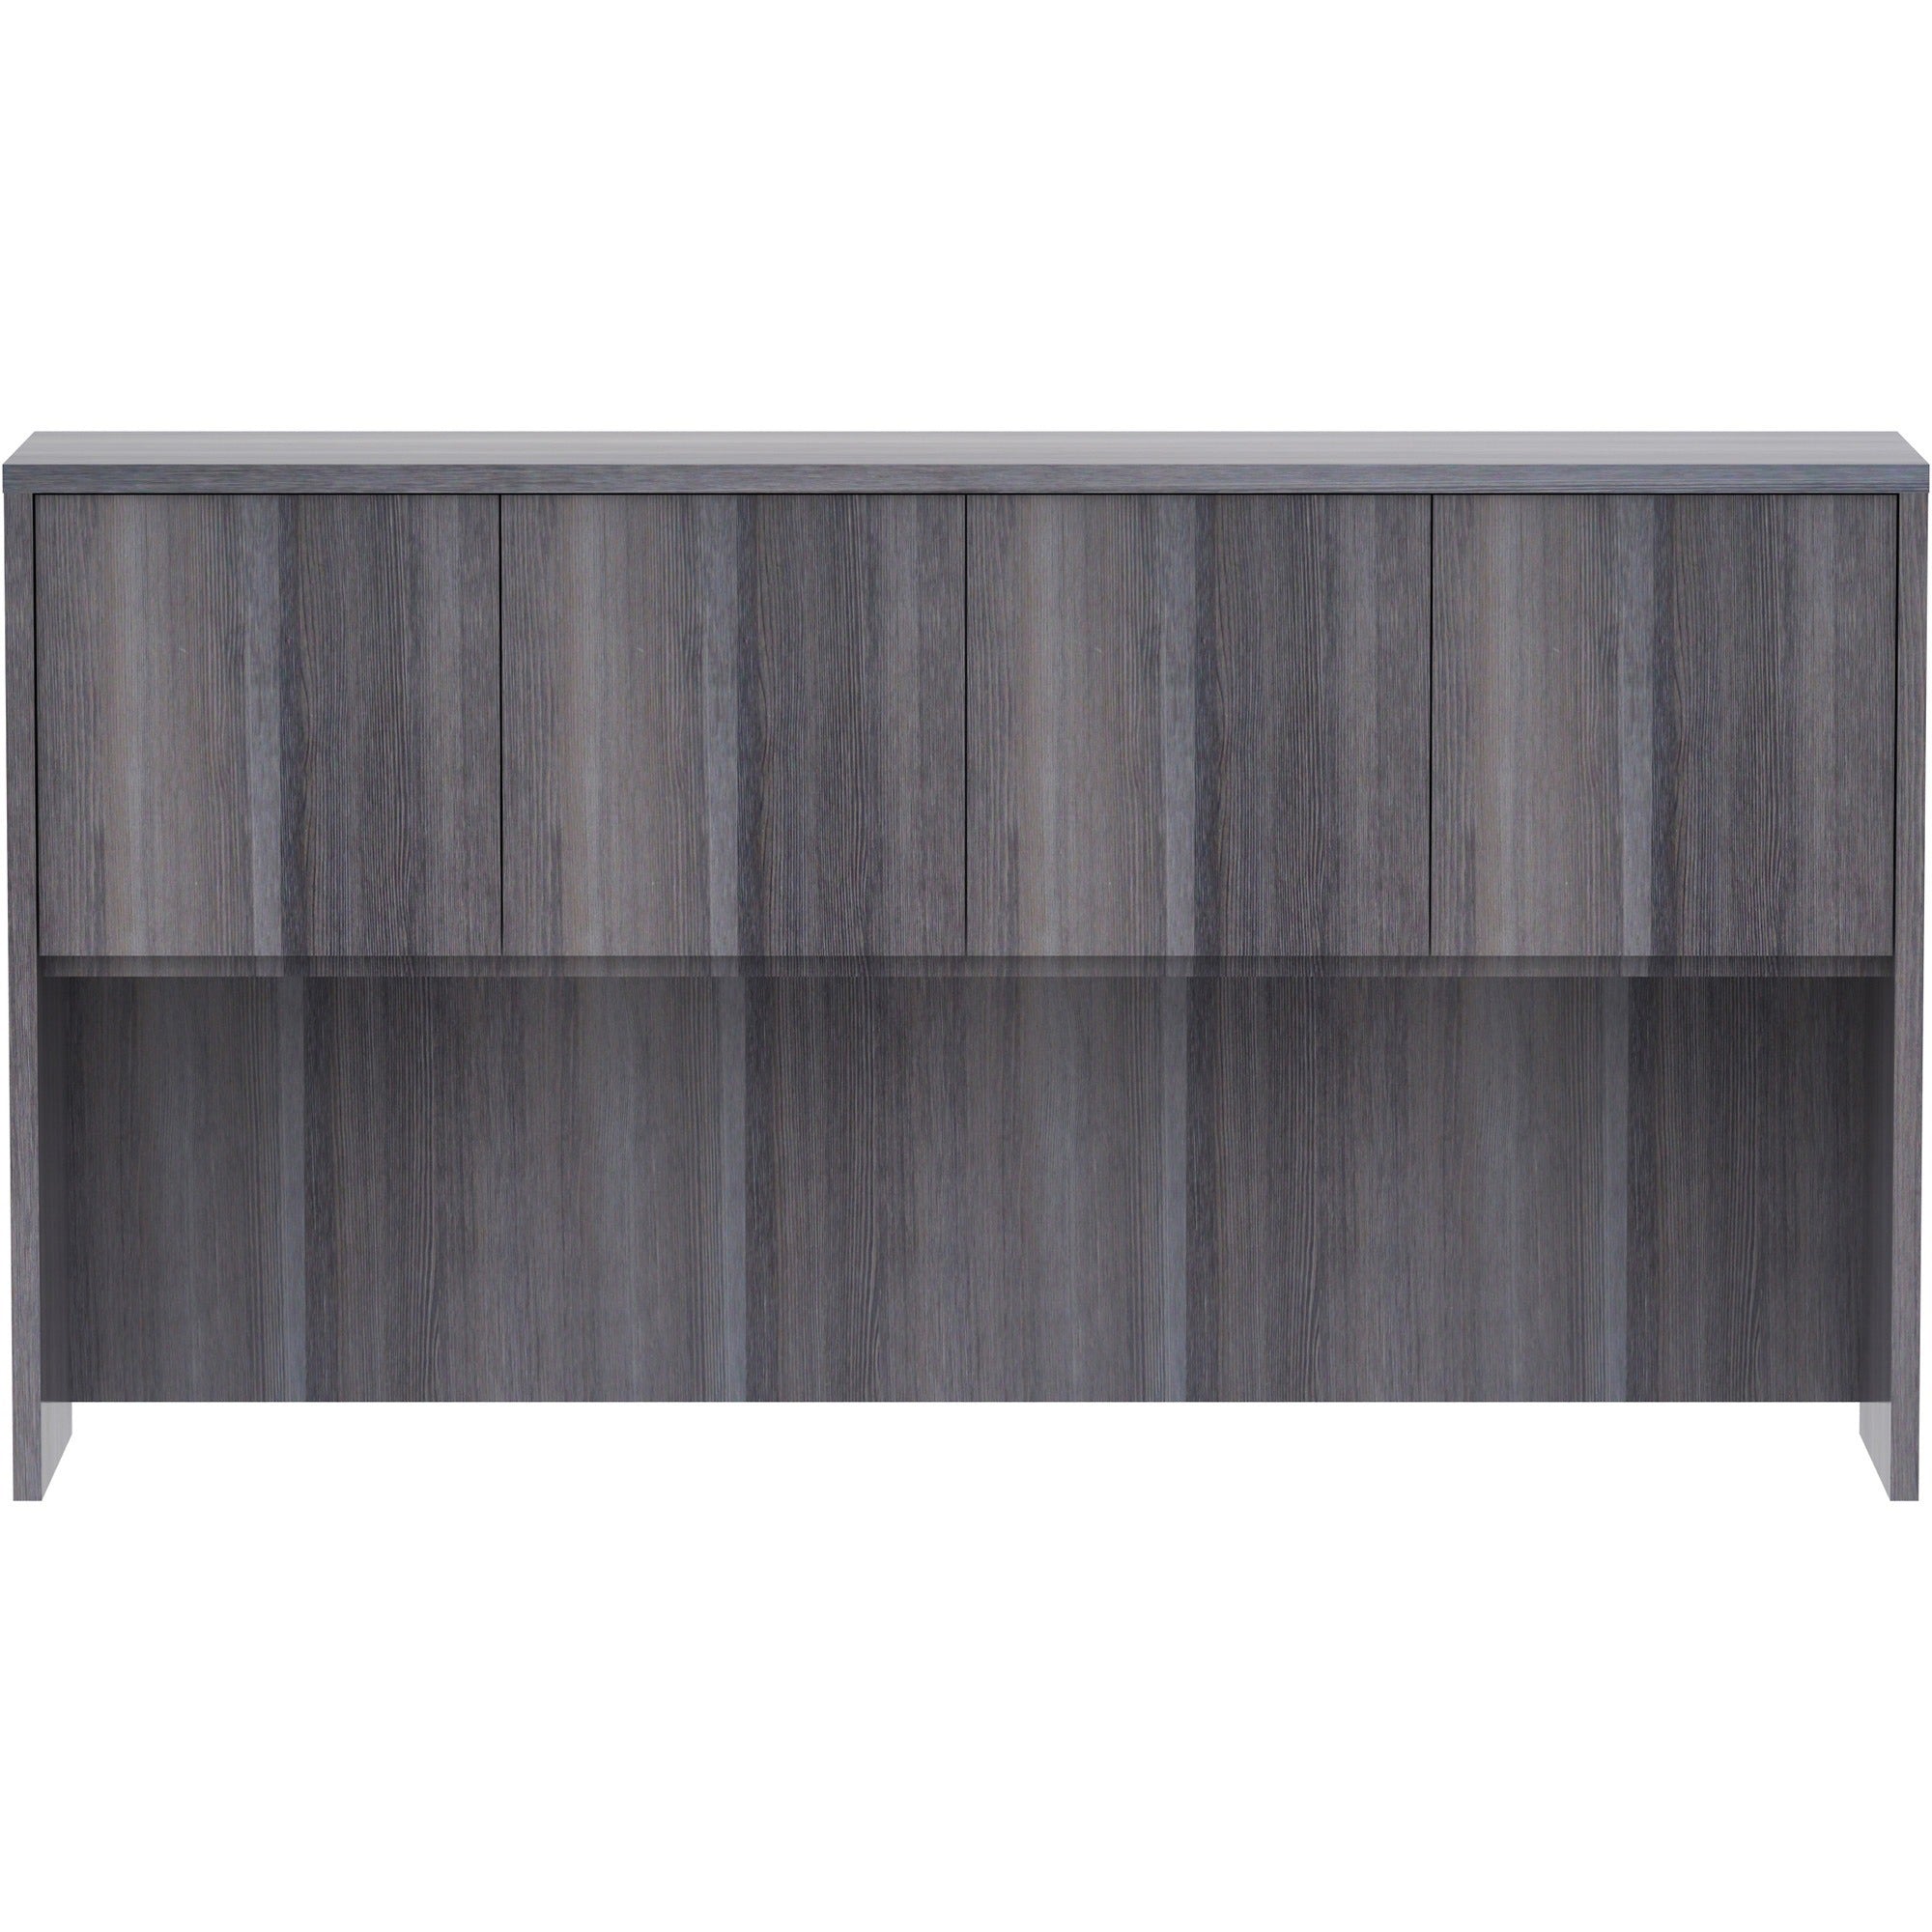 lorell-essentials-series-stack-on-hutch-with-doors-66-x-1536-4-doors-finish-weathered-charcoal-laminate_llr69619 - 2